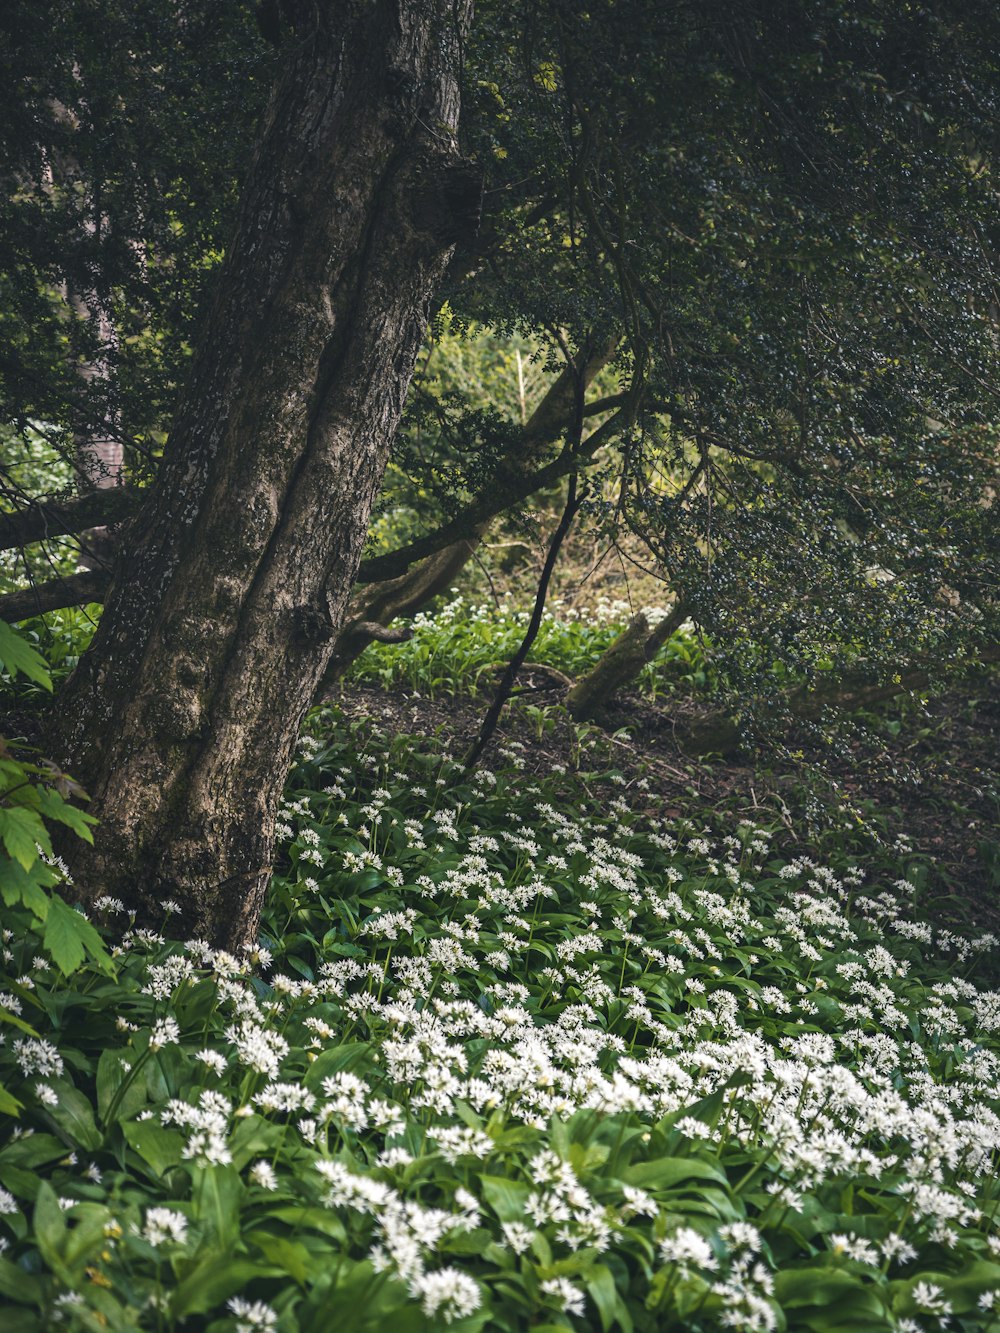 a field full of white flowers next to a tree